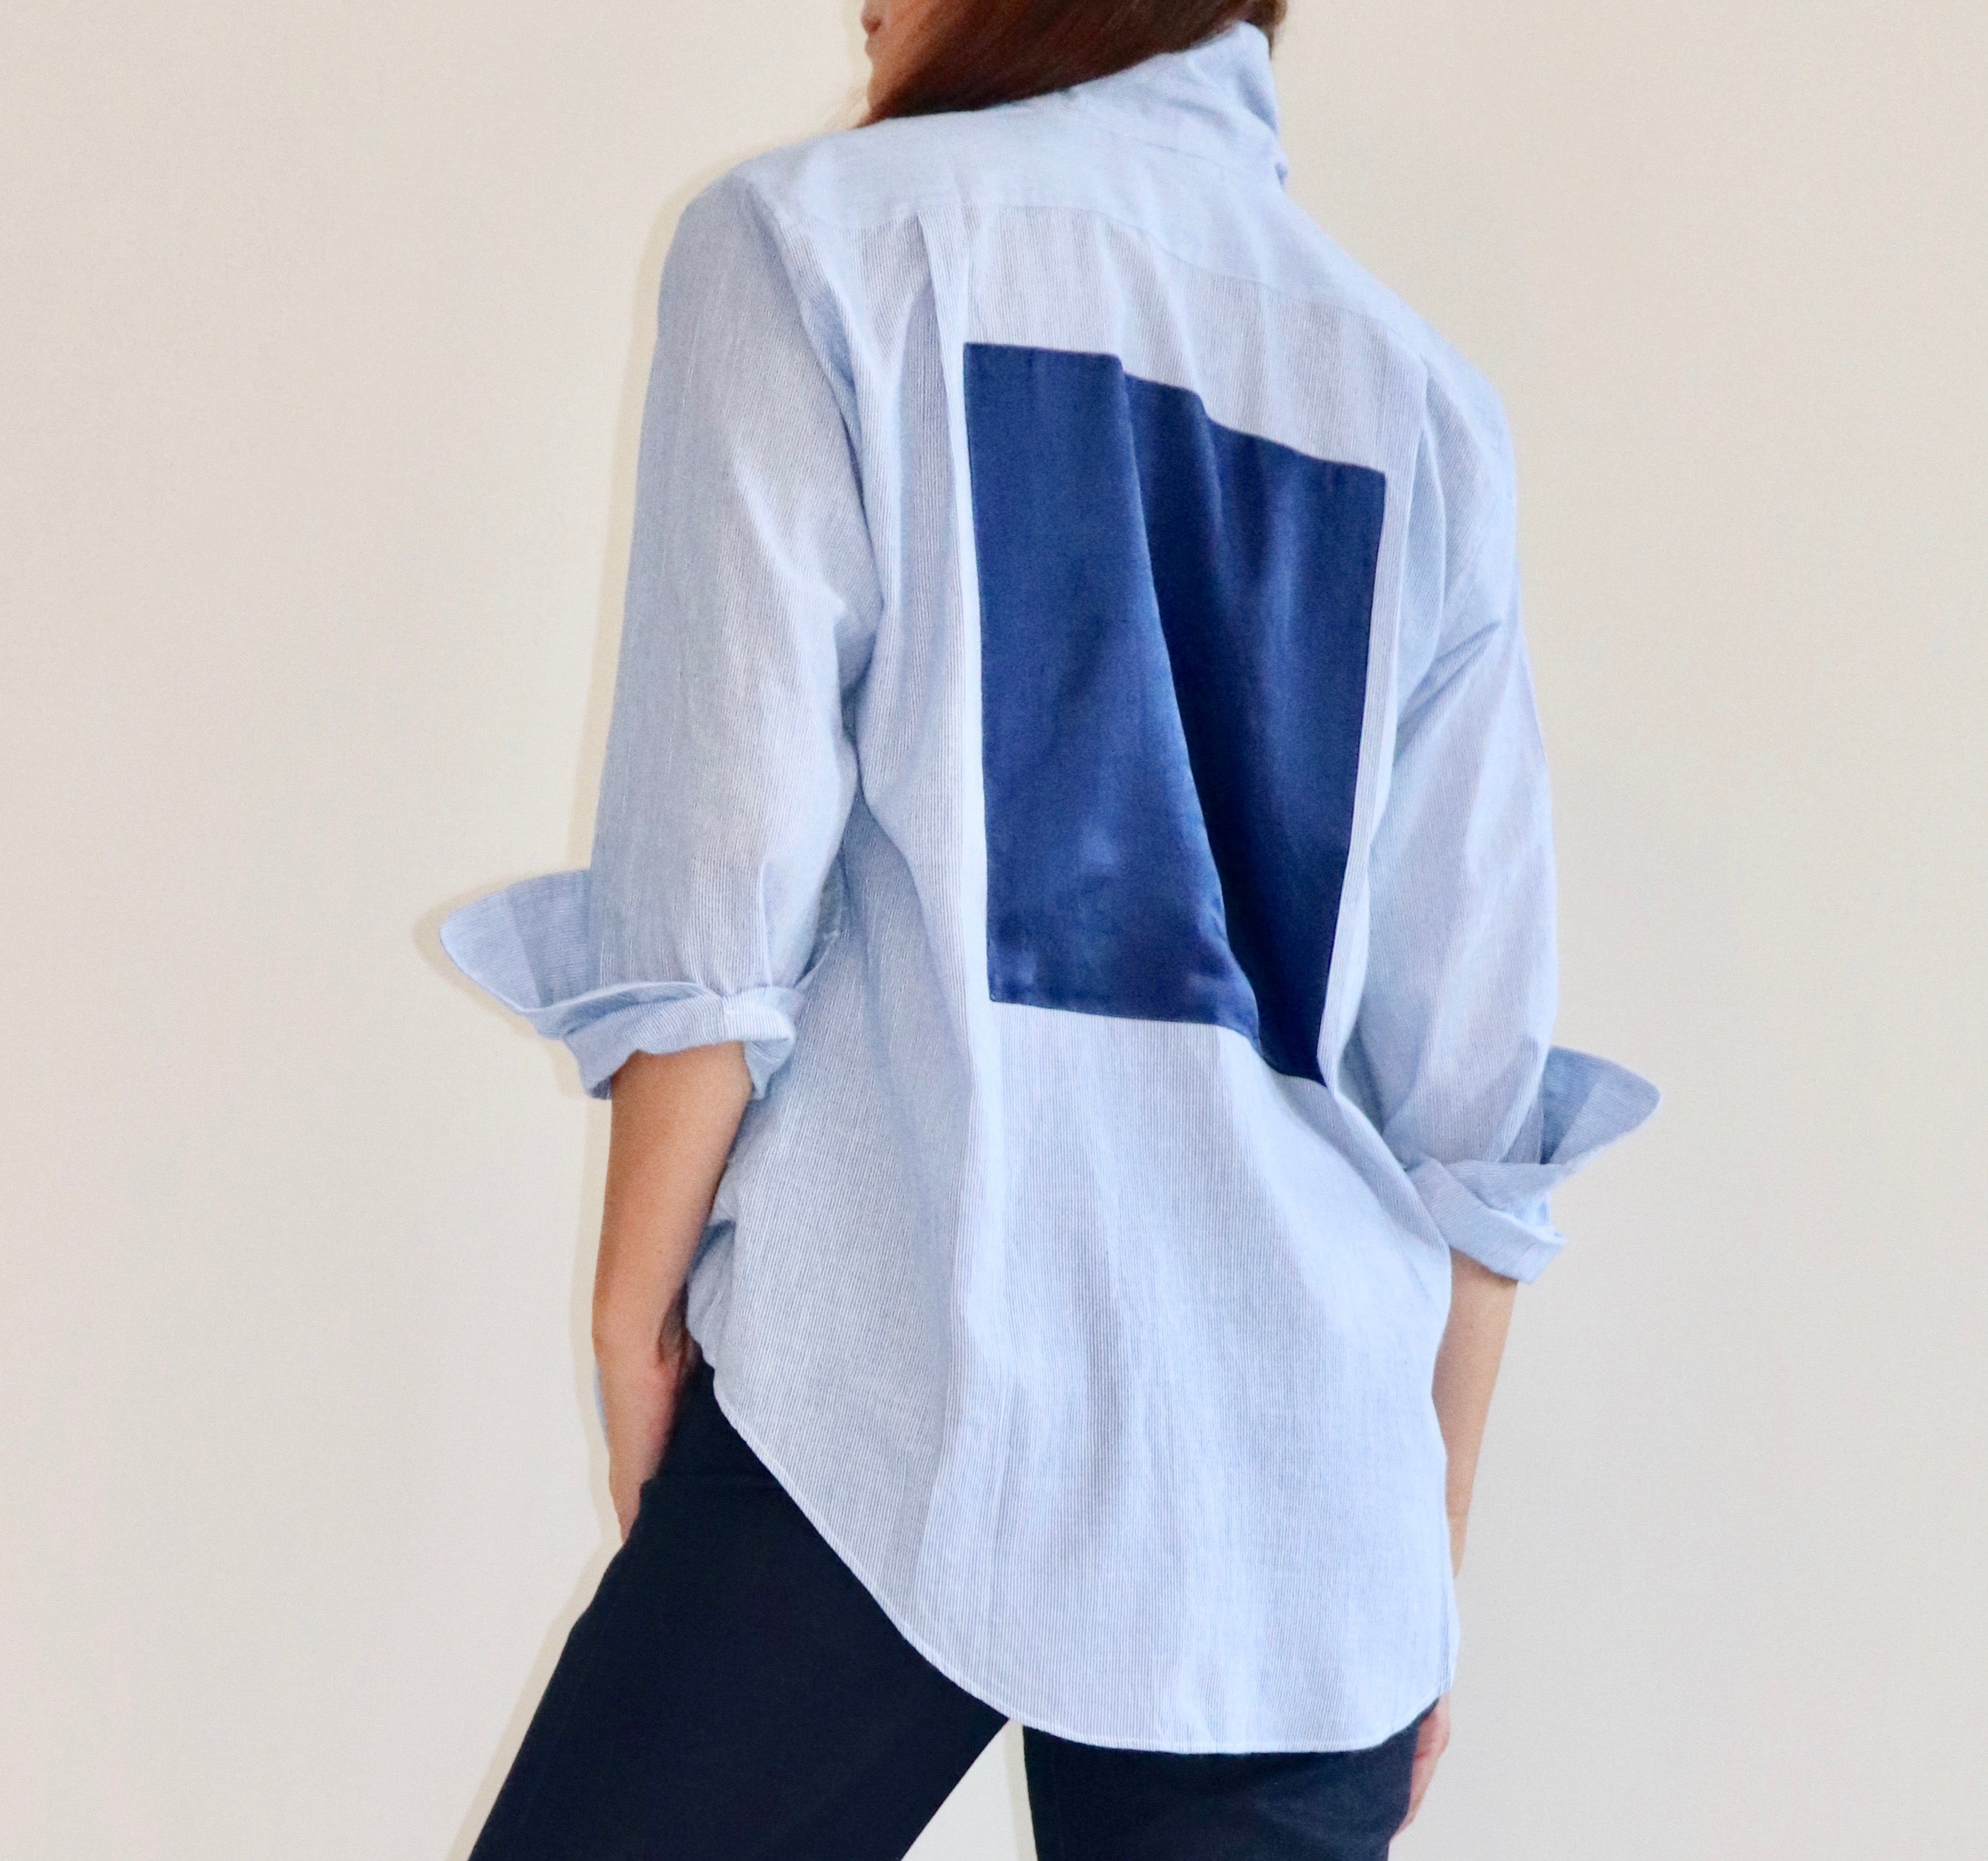 Maguire Shirt, Solid Blue/White Stripe